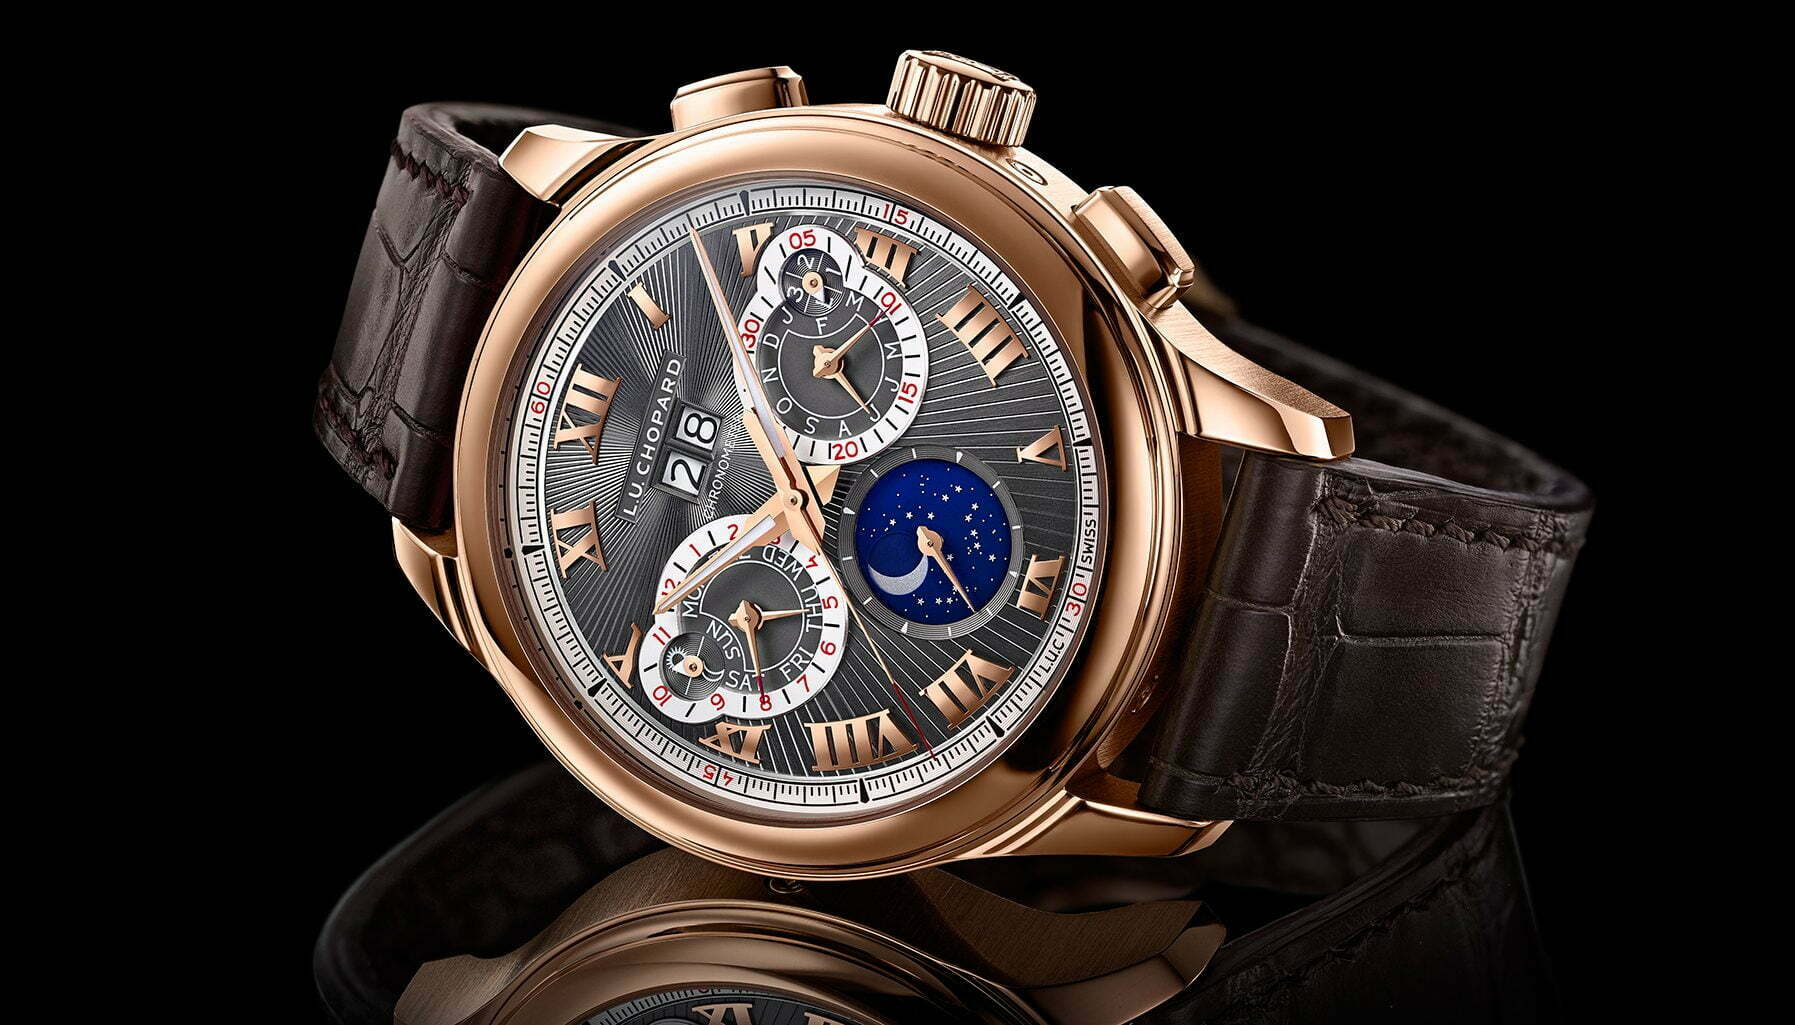 New in: Chopard's LUC Perpetual Chrono